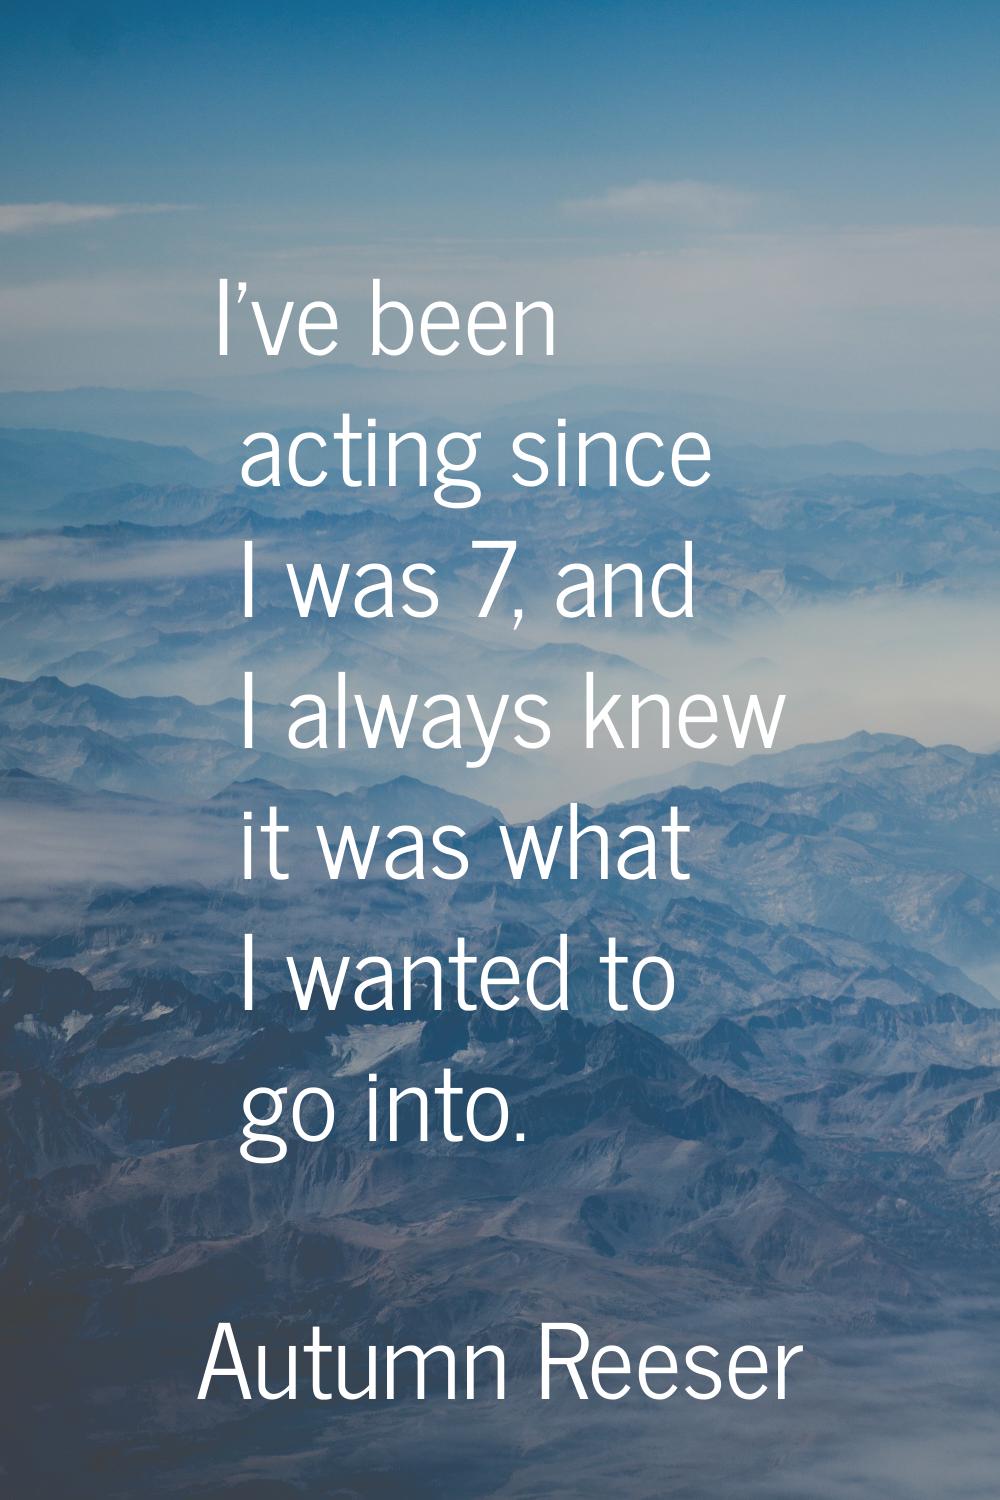 I've been acting since I was 7, and I always knew it was what I wanted to go into.